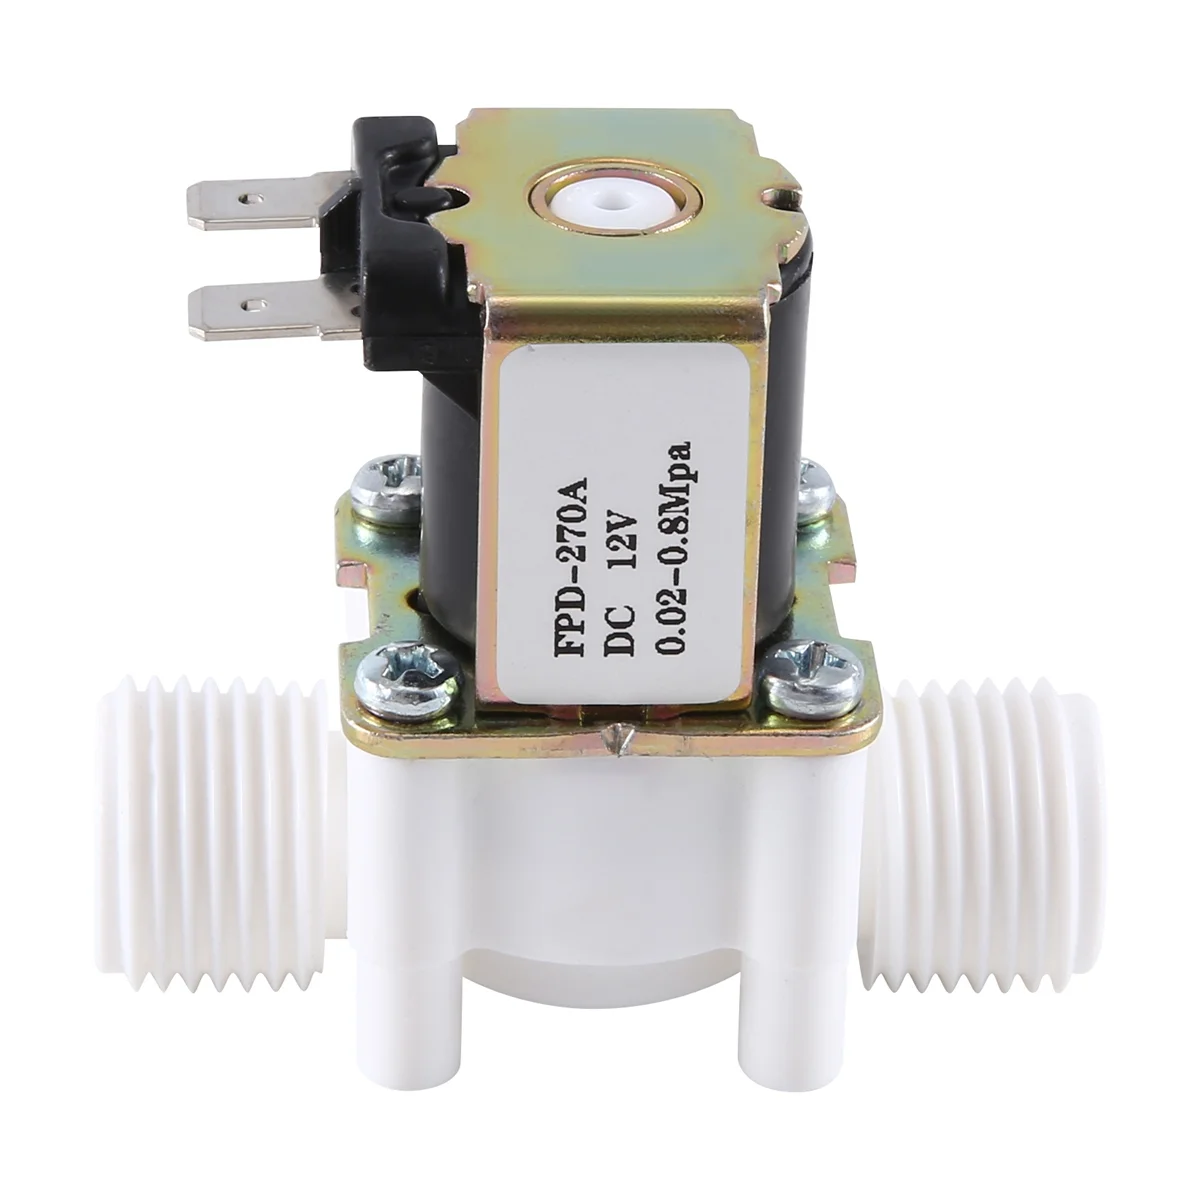 

Dc12V N/C Normally Closed Water Solenoid Valve G1/2-Inch Plastic Electrical Solenoid Valve for Water Dispenser